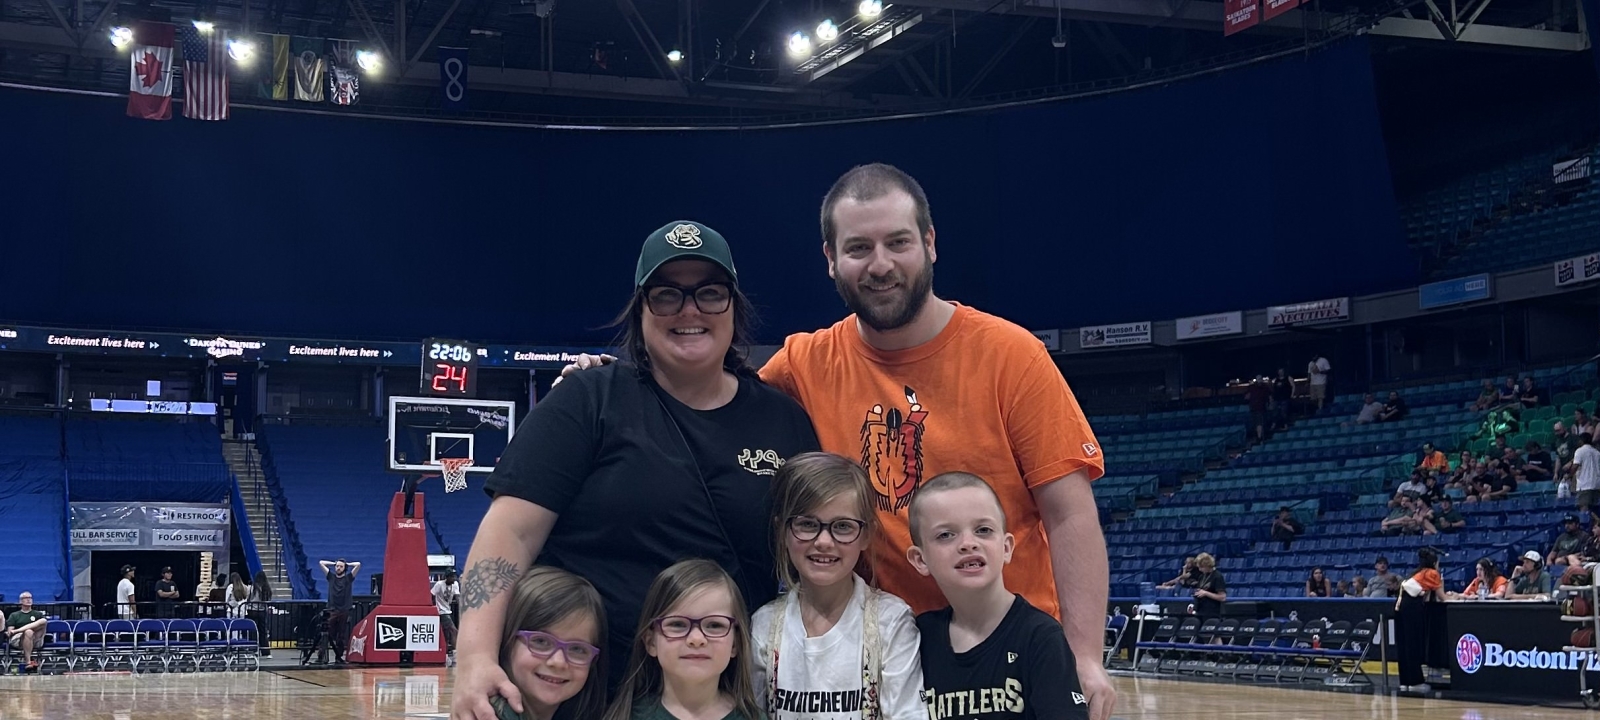 Dribble your way to a Saskatchewan Rattlers Game!